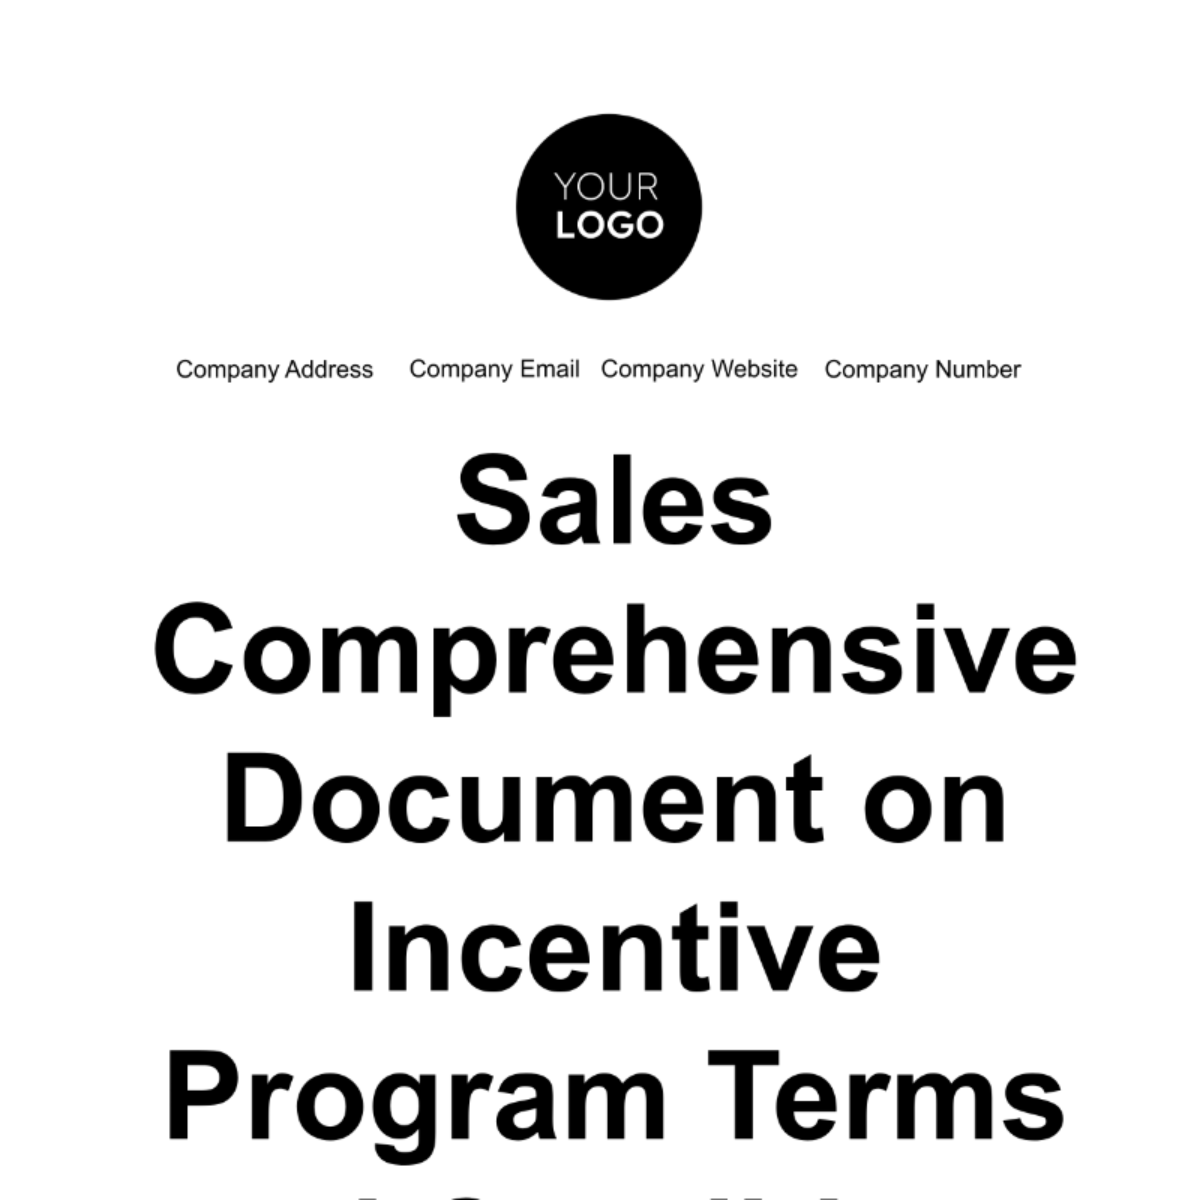 Free Sales Comprehensive Document on Incentive Program Terms and Conditions Template